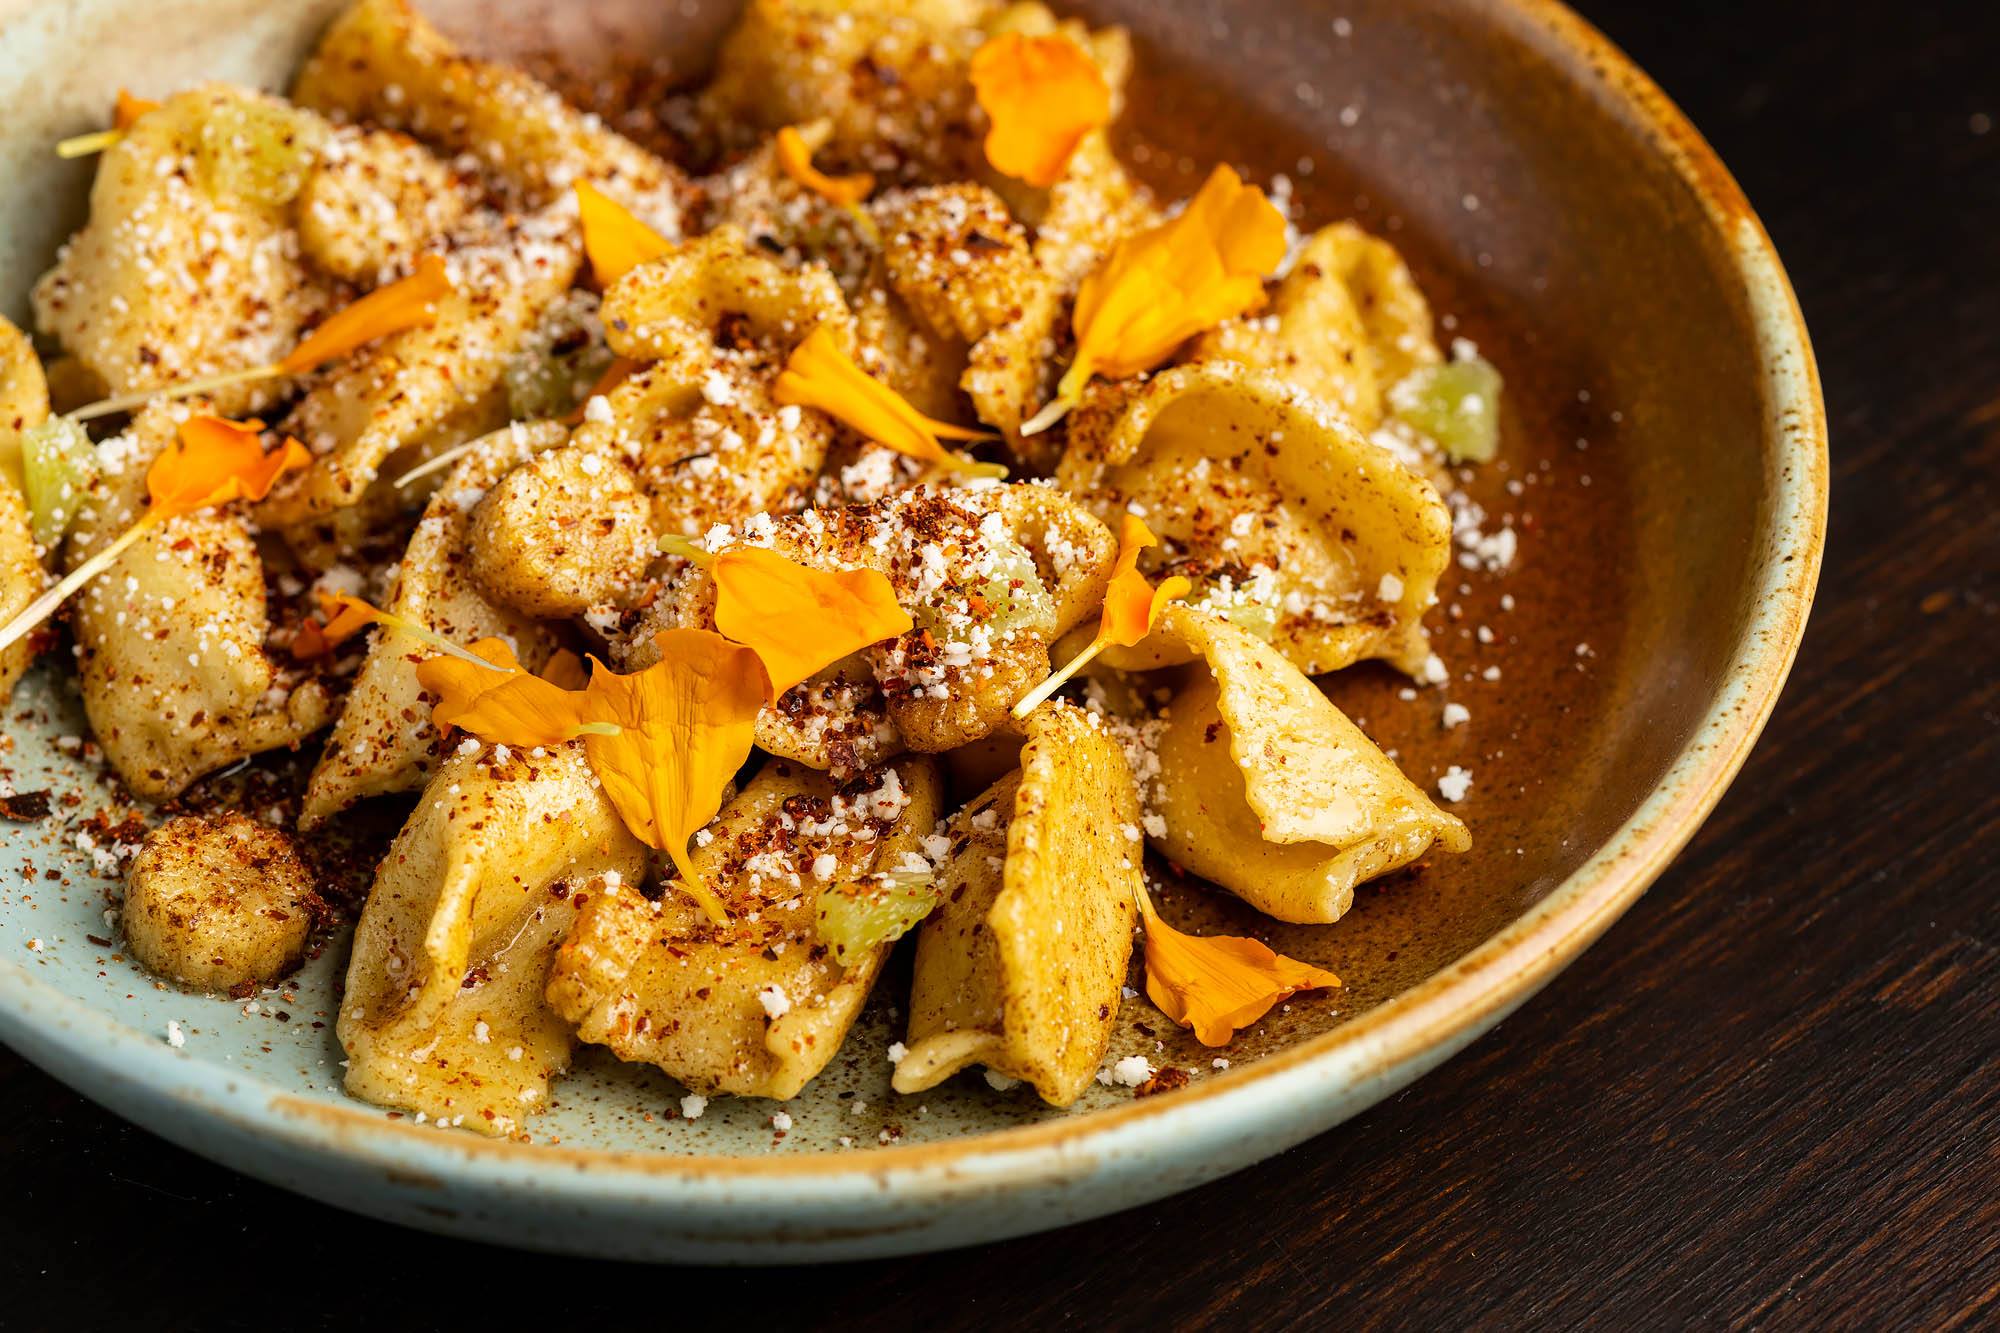 Yellow-orange stuffed pasta with edible flowers in a bowl.